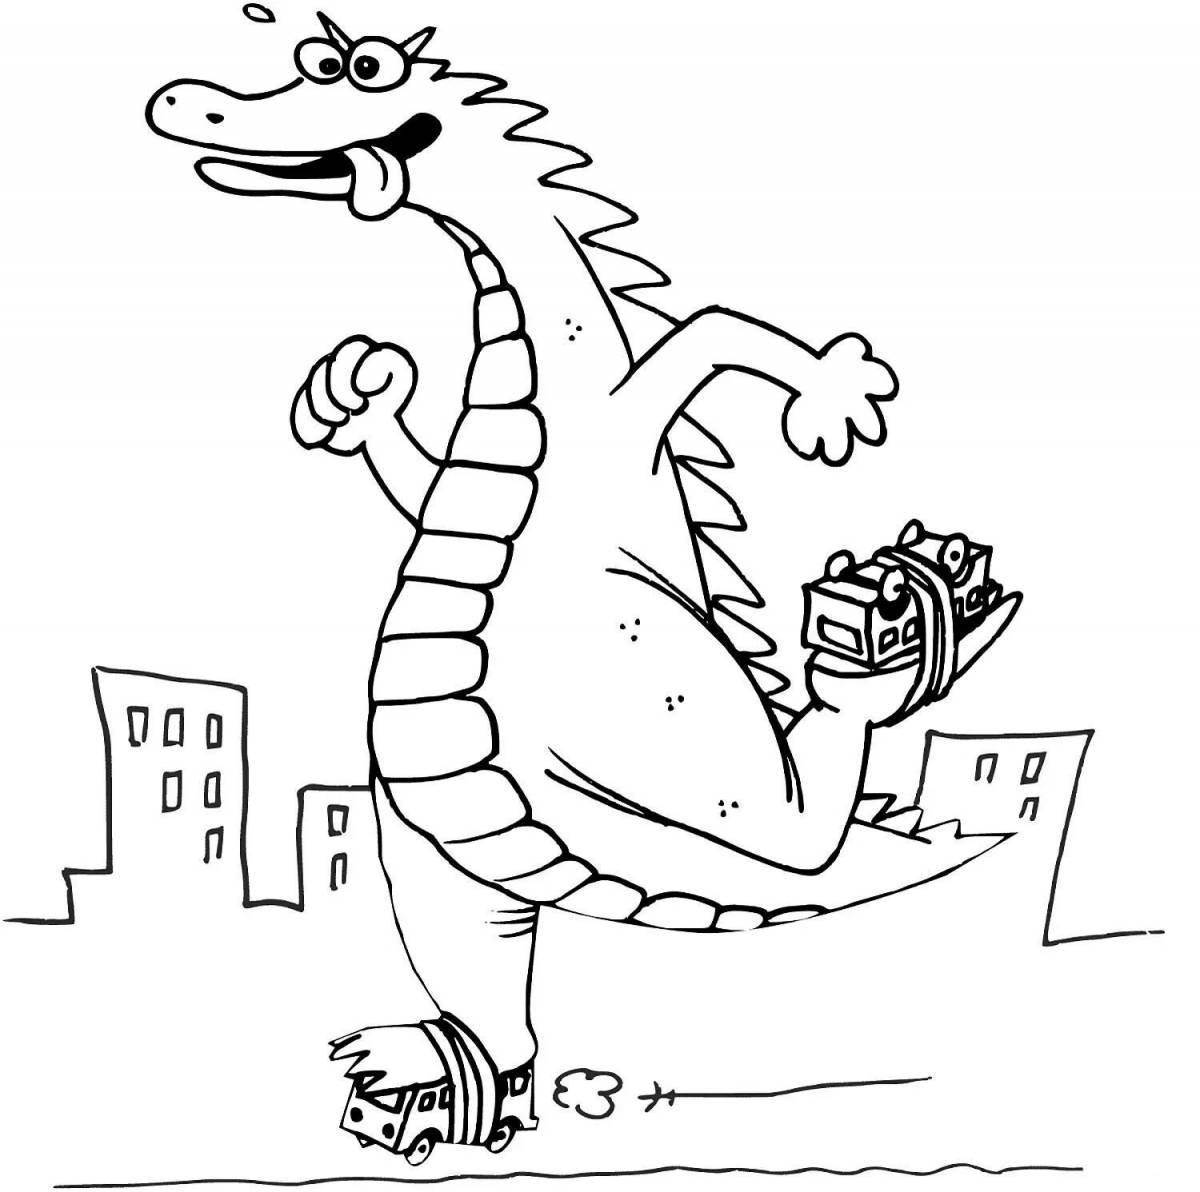 Colorful godzilla coloring page for kids